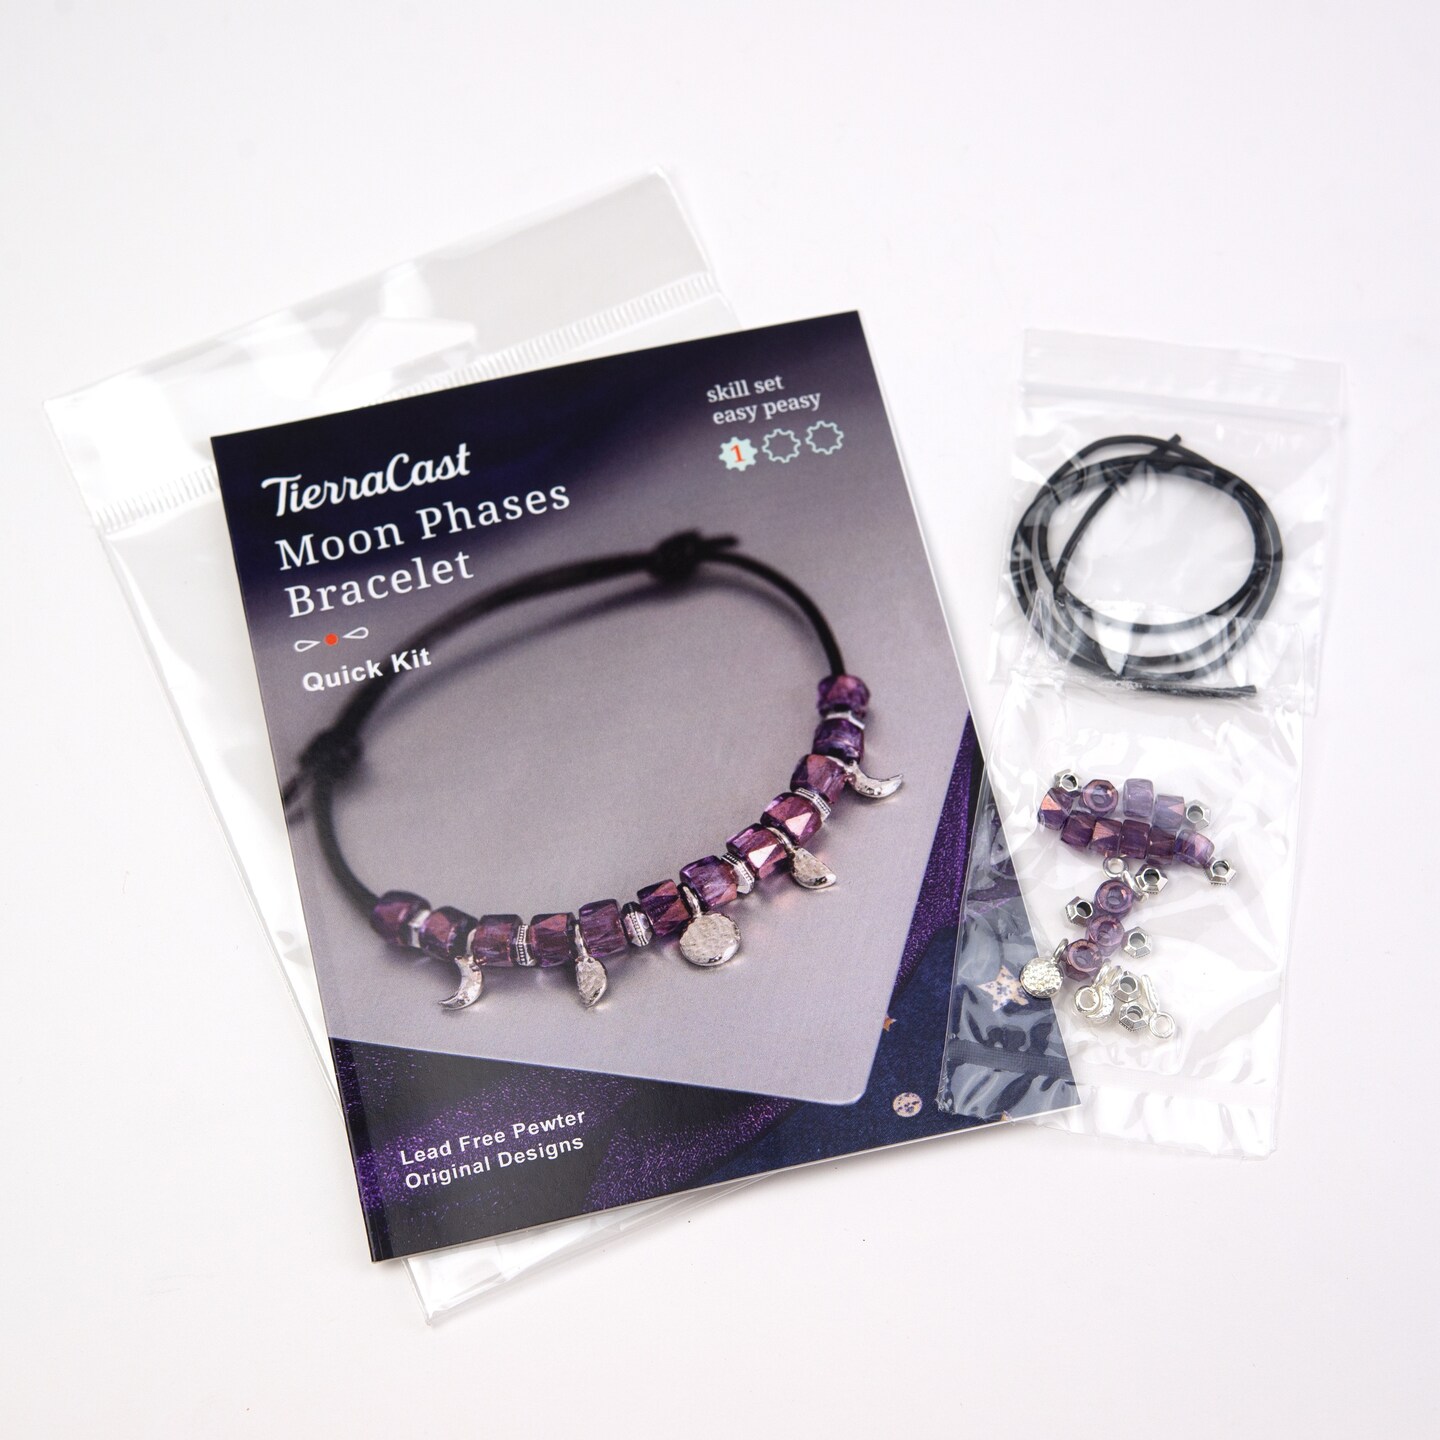 Online Class: Don't Do These 5 Things When Making Jewelry | Michaels -  YouTube